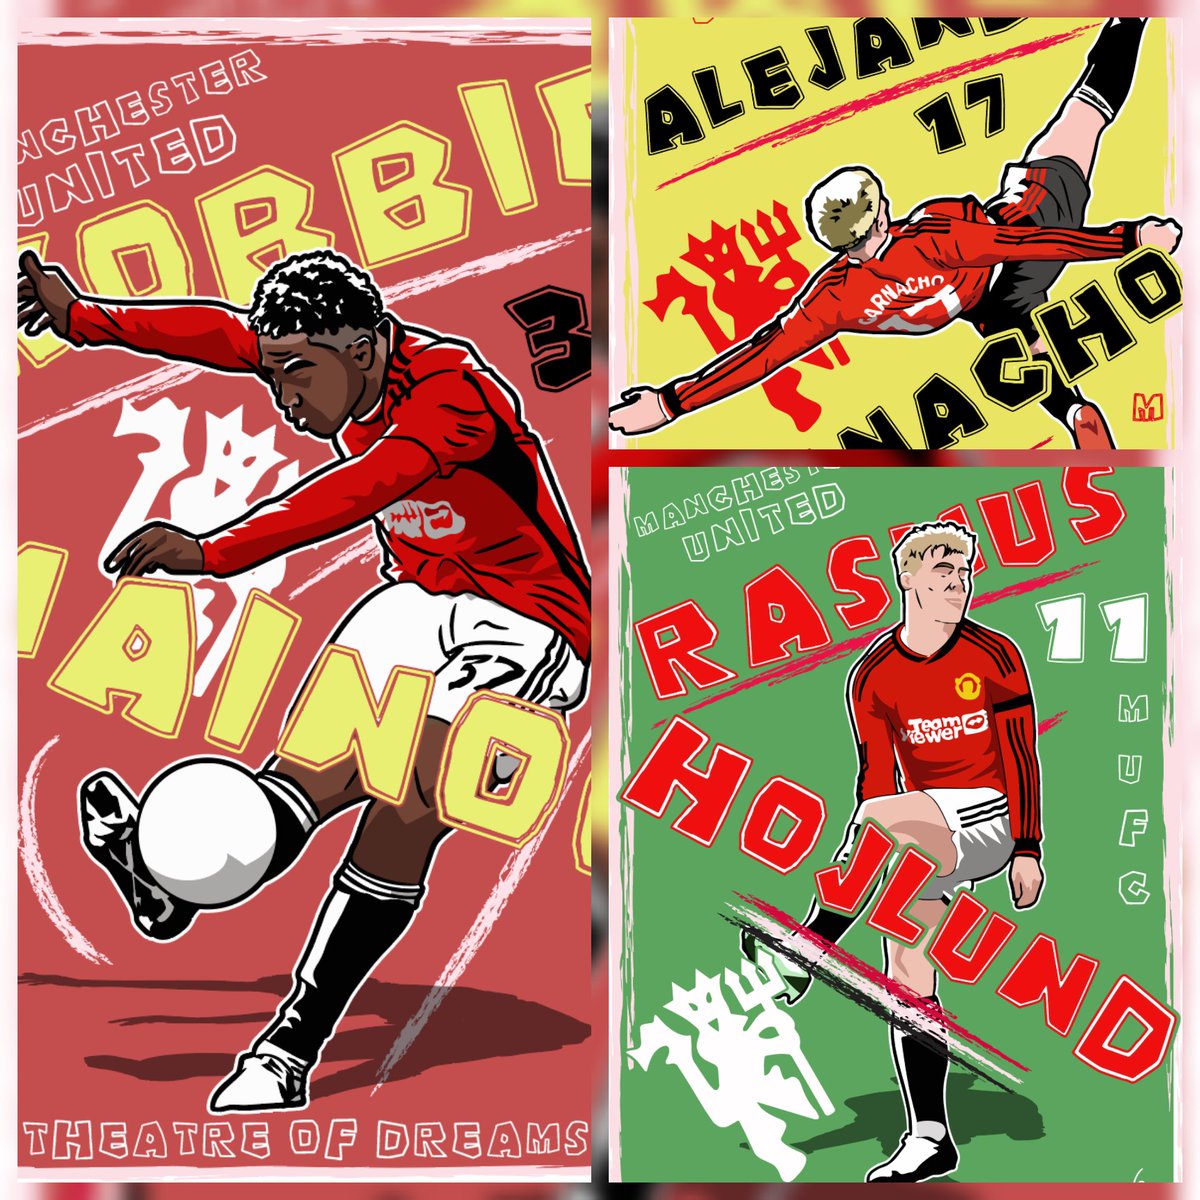 NEW Kobbie, Alejandro & Rasmus 3 for 2 A4 Laminated Prints Only 15 Sets Available Get them here utdadored.co.uk/product-page/3… Select PRINTS ONLY for FREE DELIVERY Please RePost Cheers #MUFC #ManUtd #adoRED #ManchesterUnited #KobbieMainoo #RasmusHojlund #Garnacho